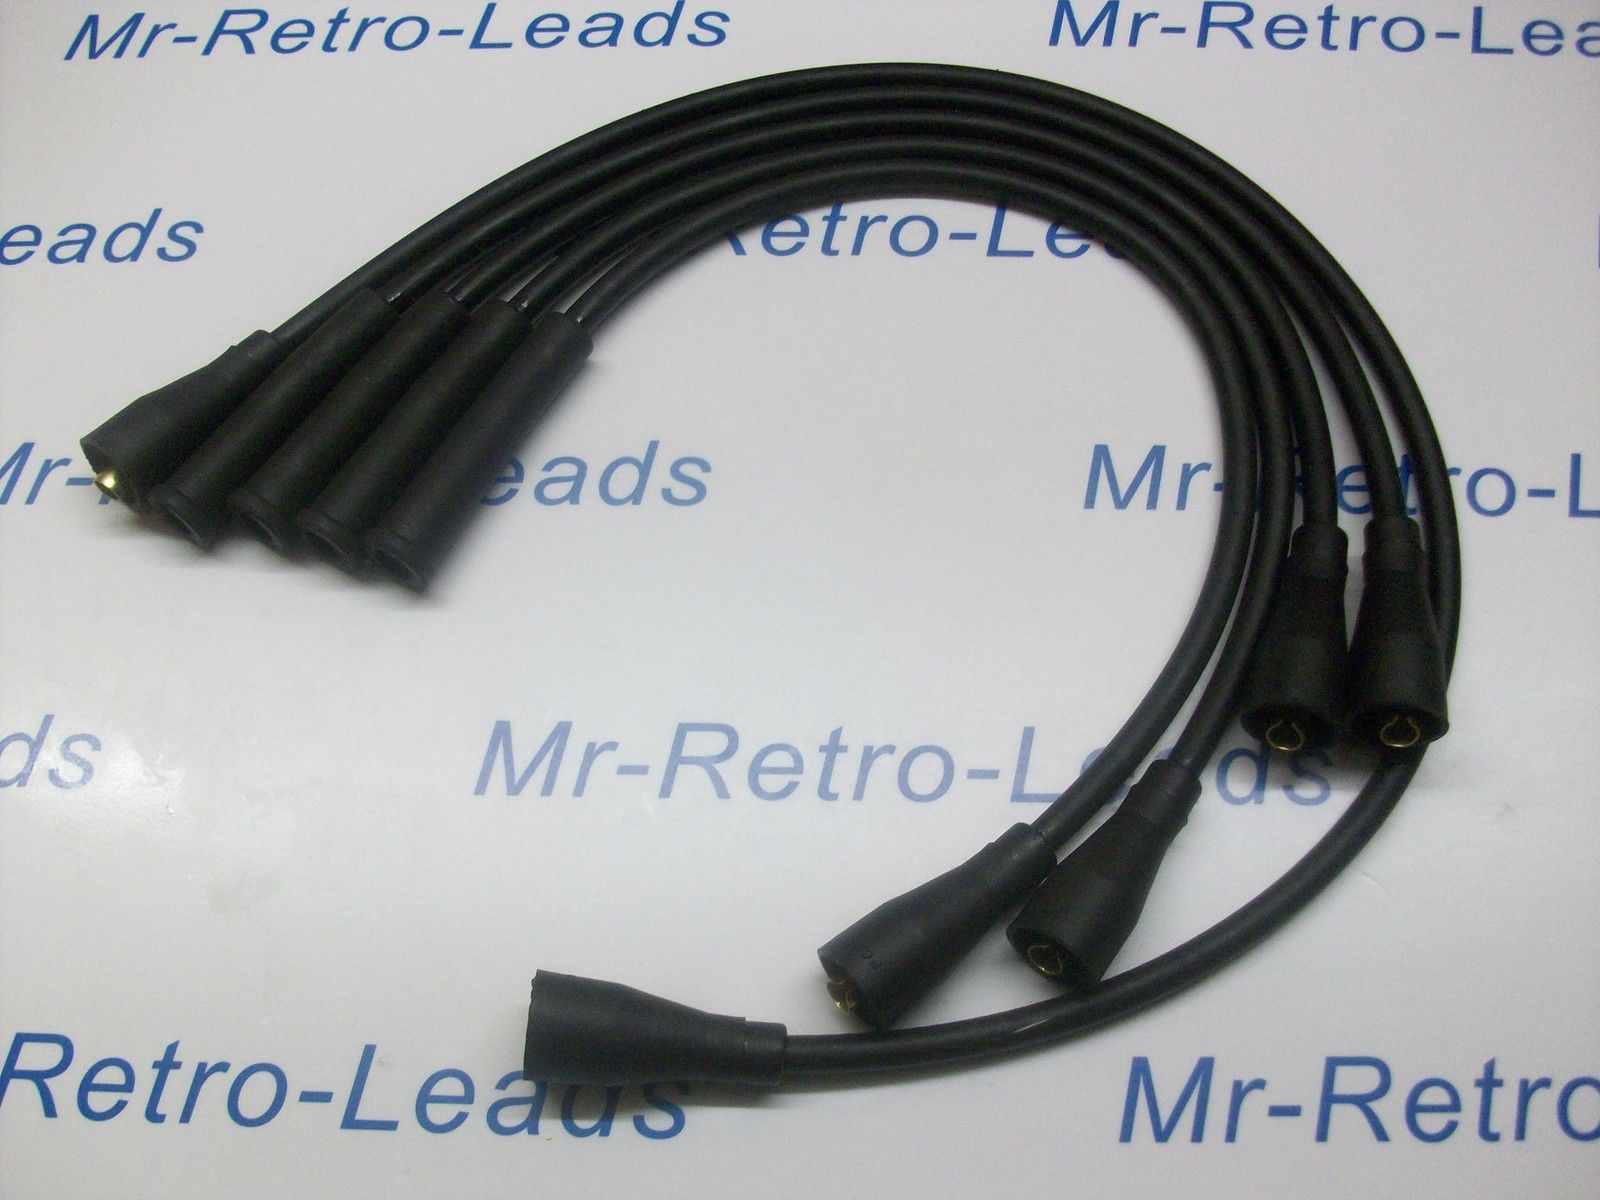 Black 8mm Performance Ignition Leads Land Rover Defender Series 4 Cyl Quality..